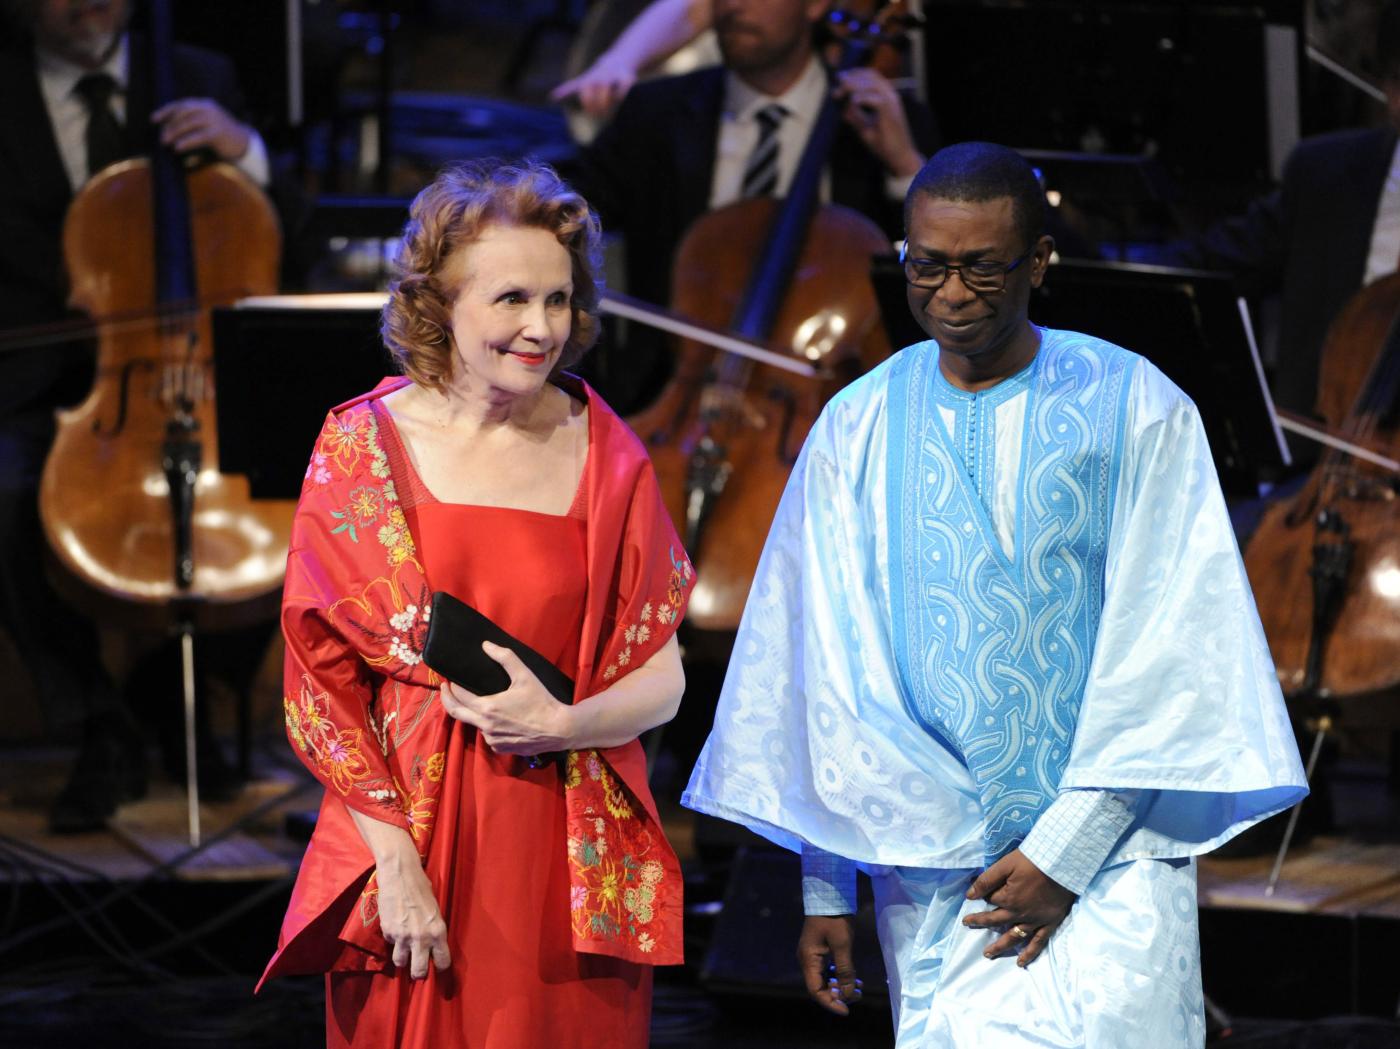 Kaija Saariaho and Senegalese singer Youssou N'Dour took the stage in Stockholm in 2013 when they both accepted the Polar Music Prize.